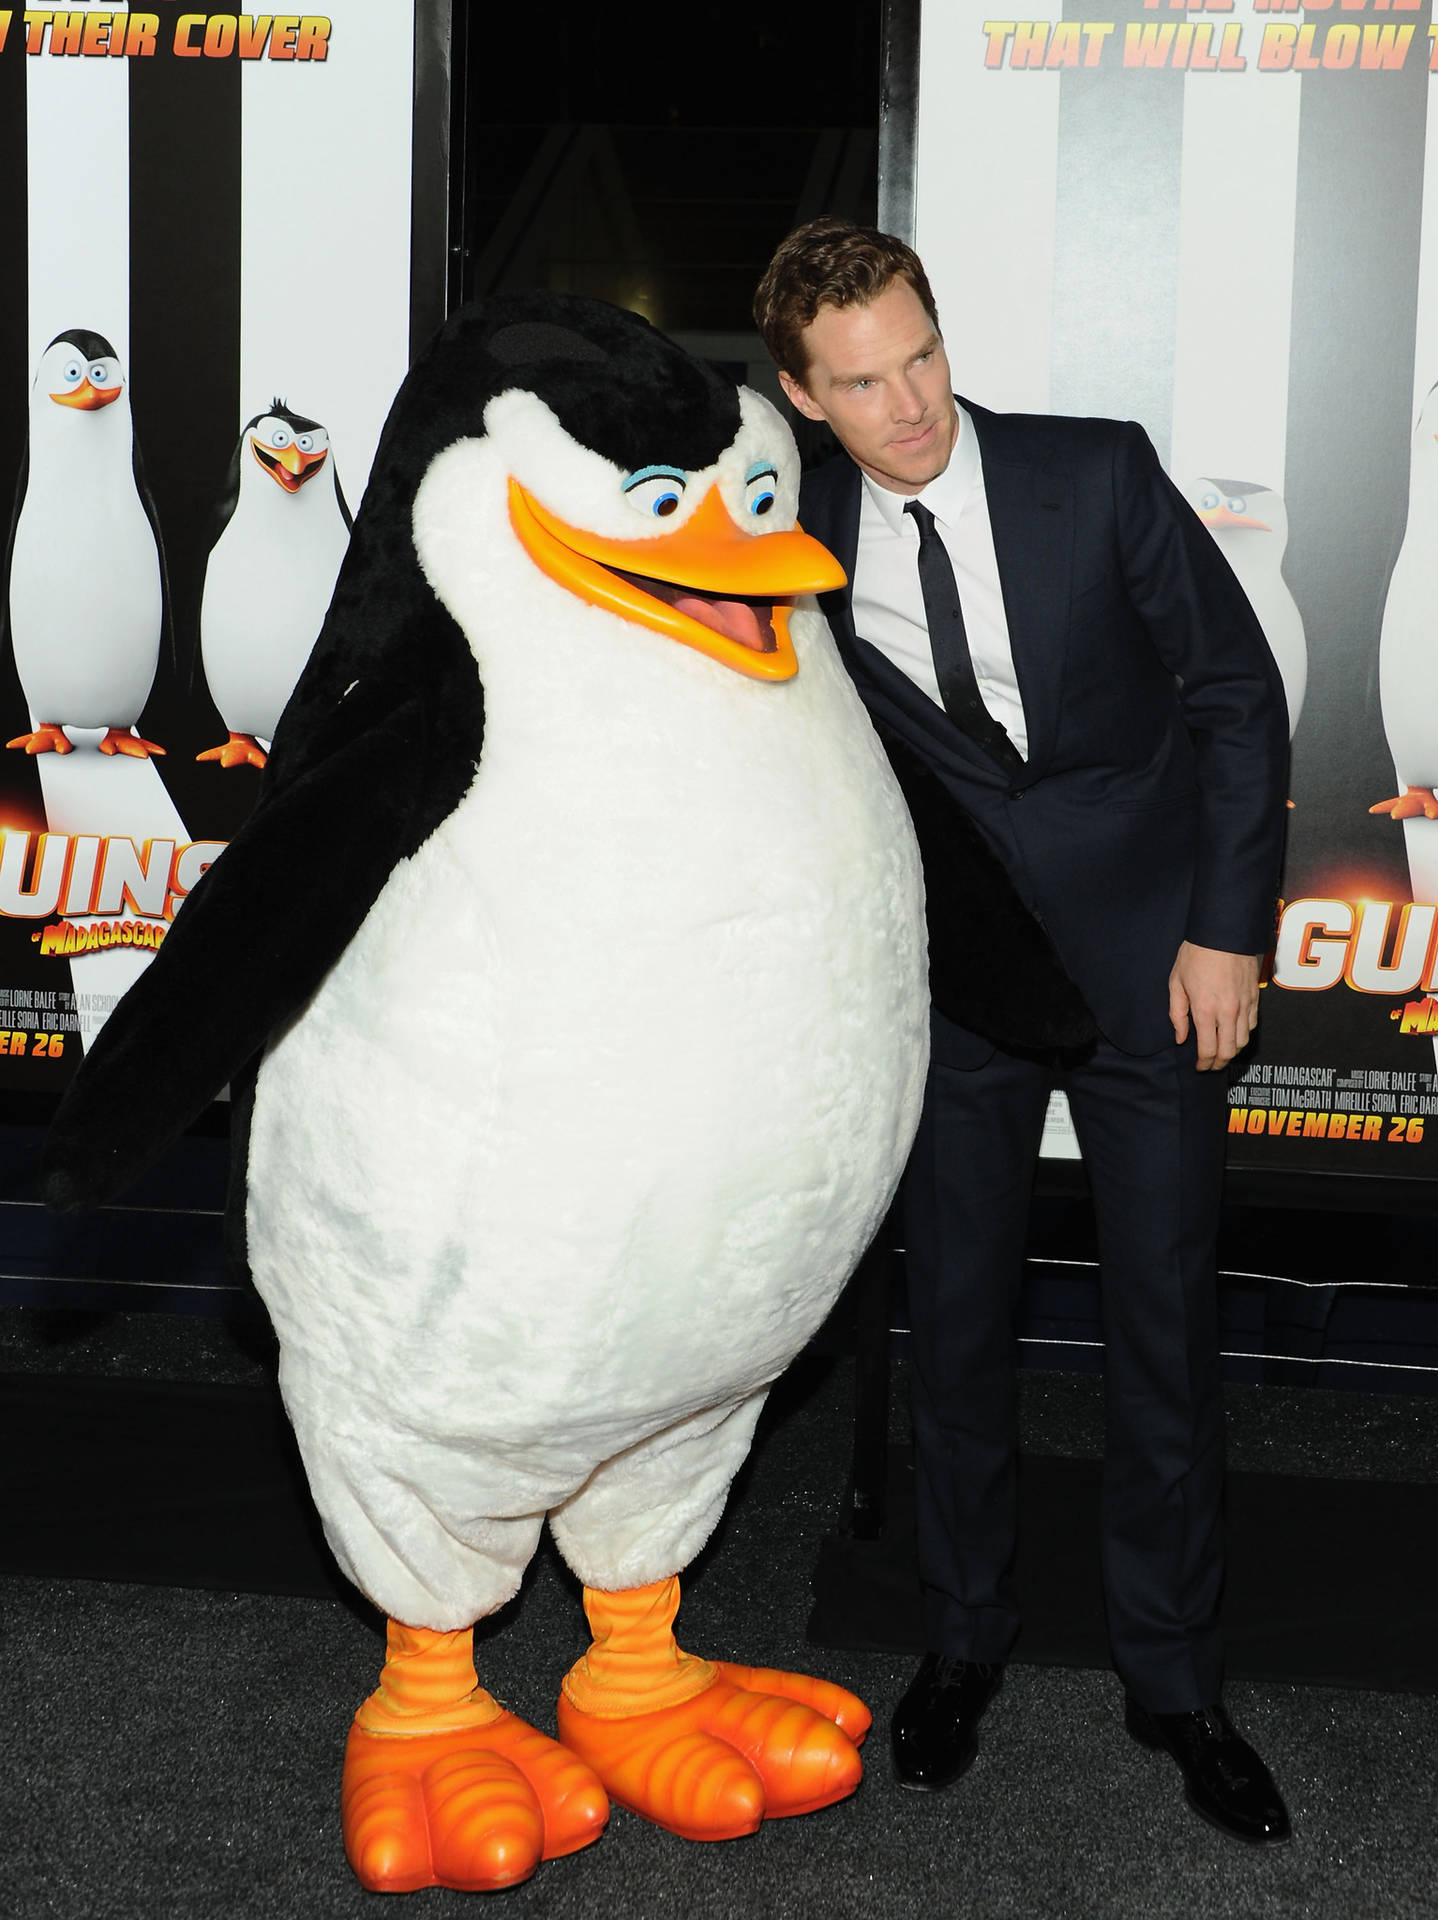 Penguins On An Adventure: The Penguins Of Madagascar Background